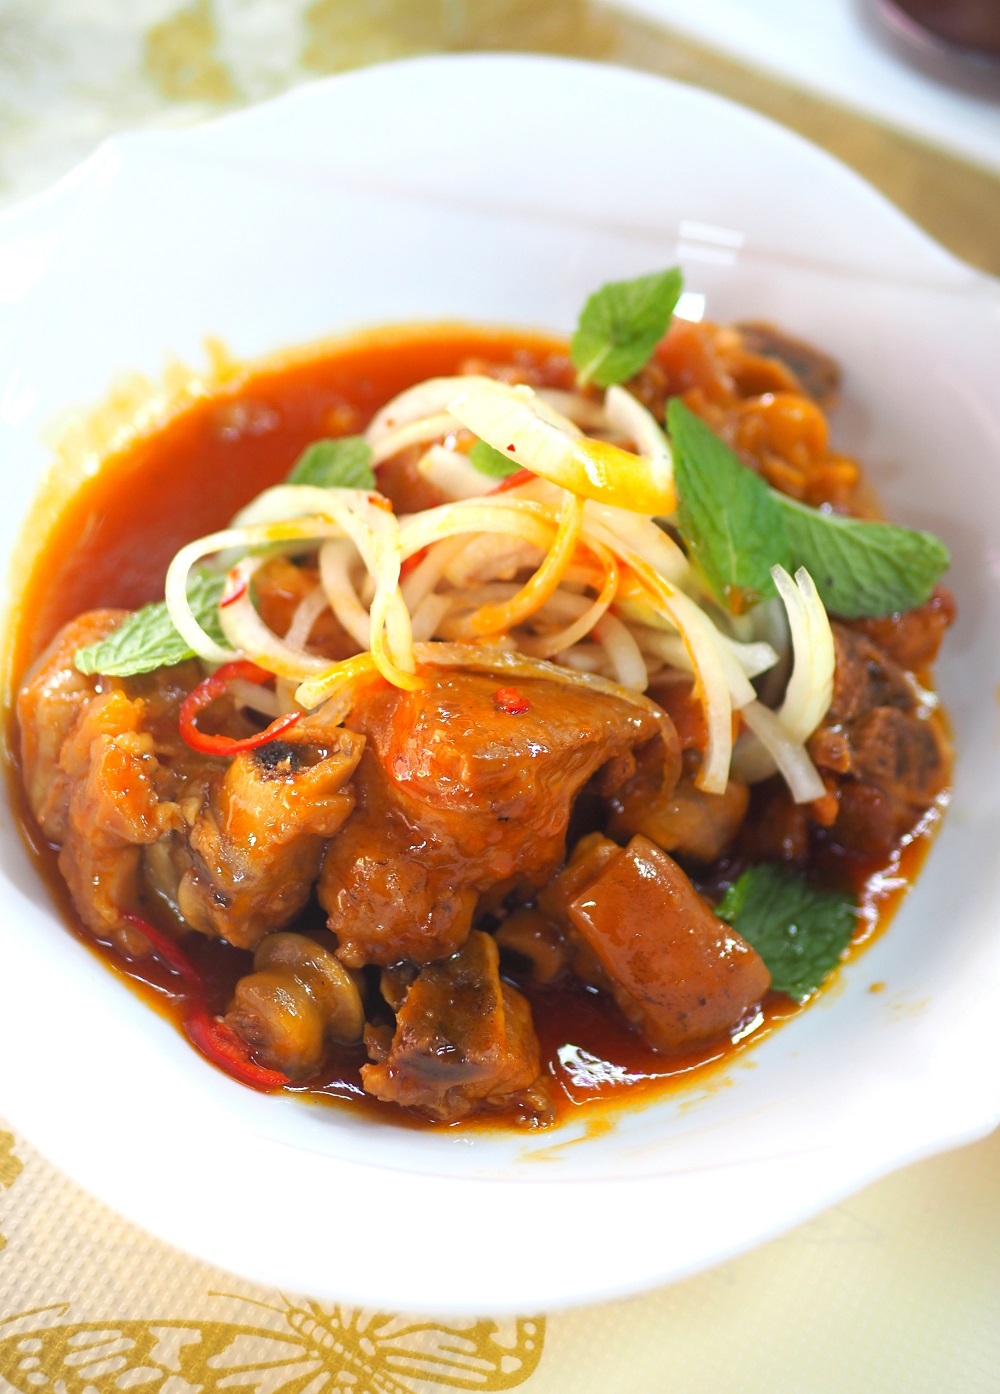 The special for the day was this awesome Mongolian braised pork trotters with a rich tomato sauce.